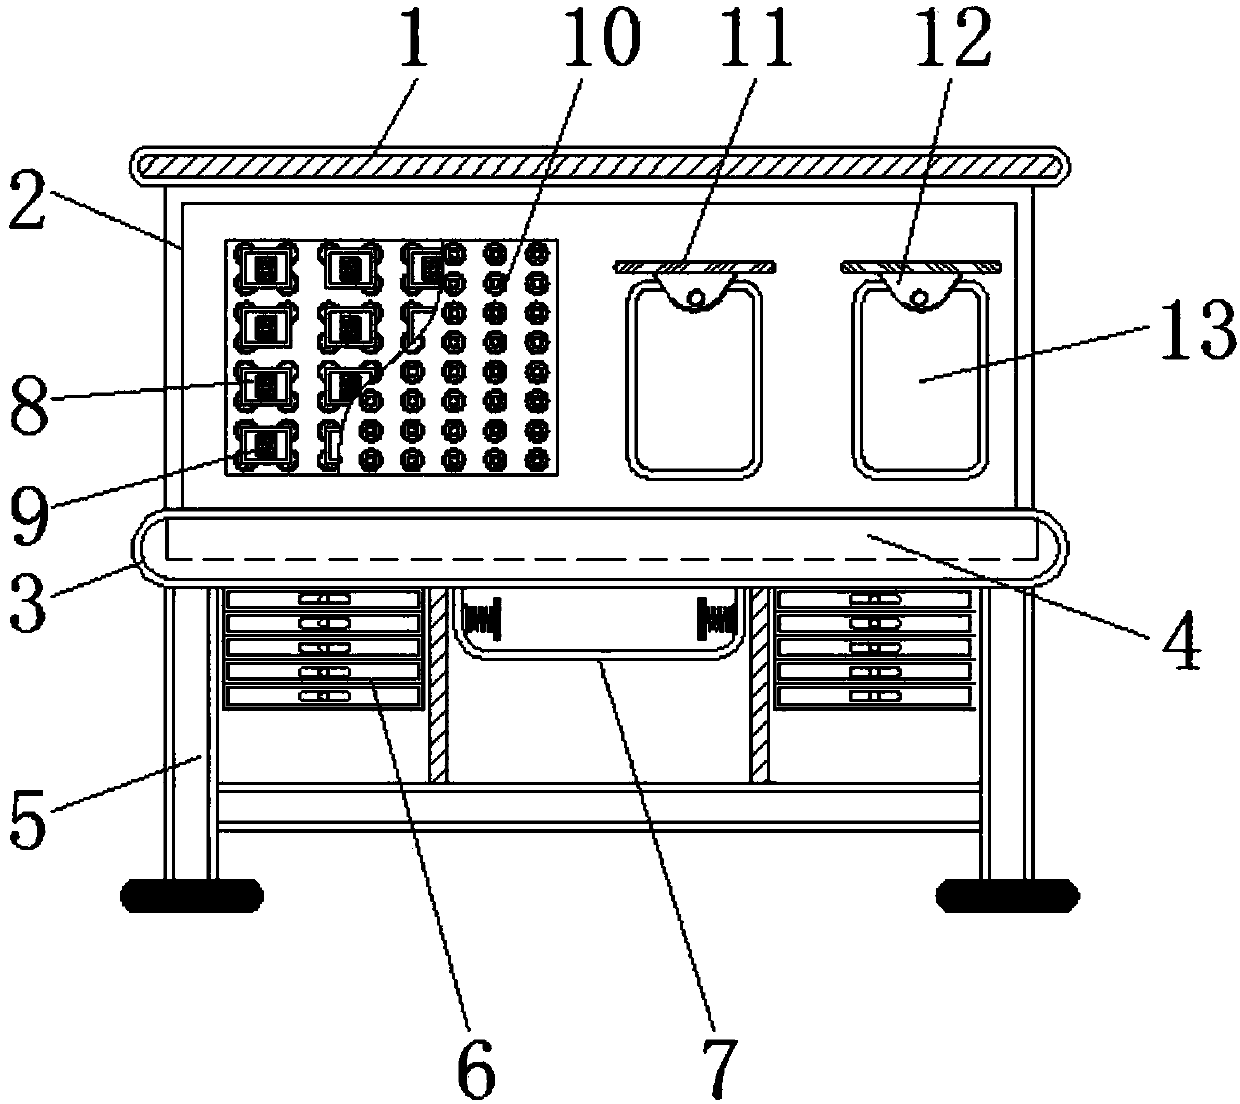 Working table facilitating dismantling and installation of electromechanical device